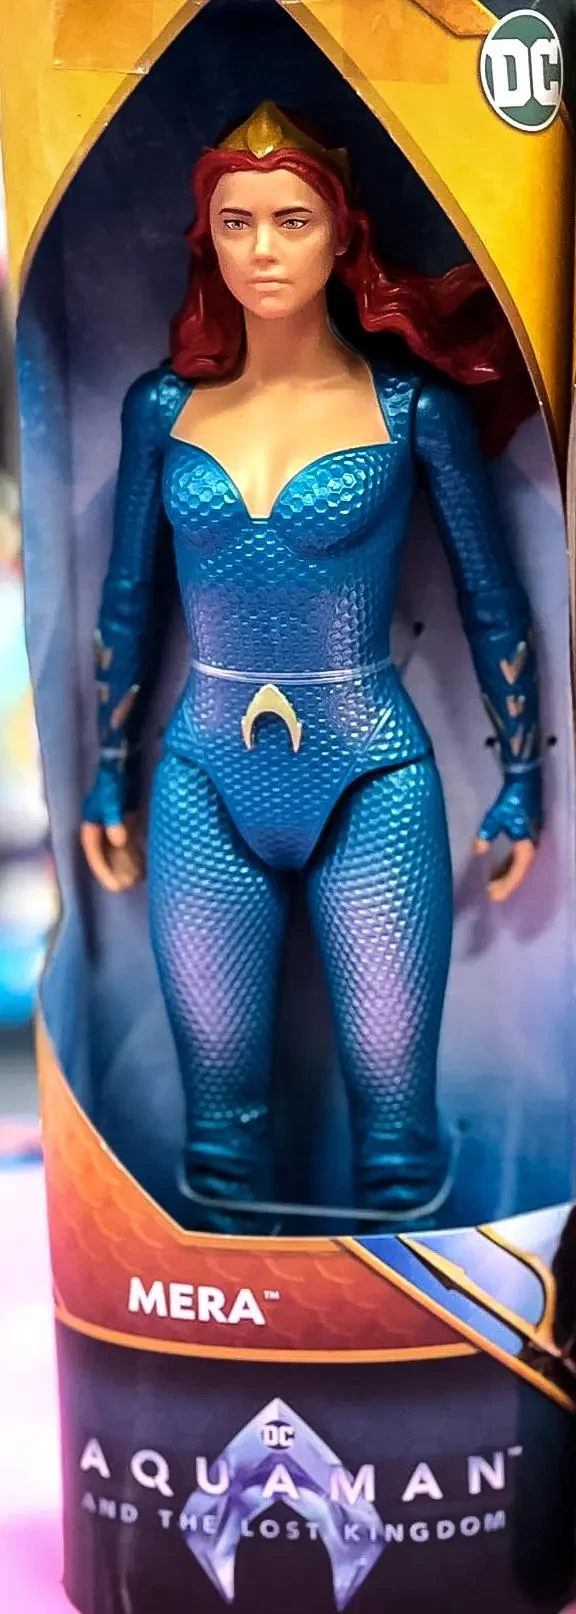 The newly released toy featuring Mera's first look from Aquaman 2